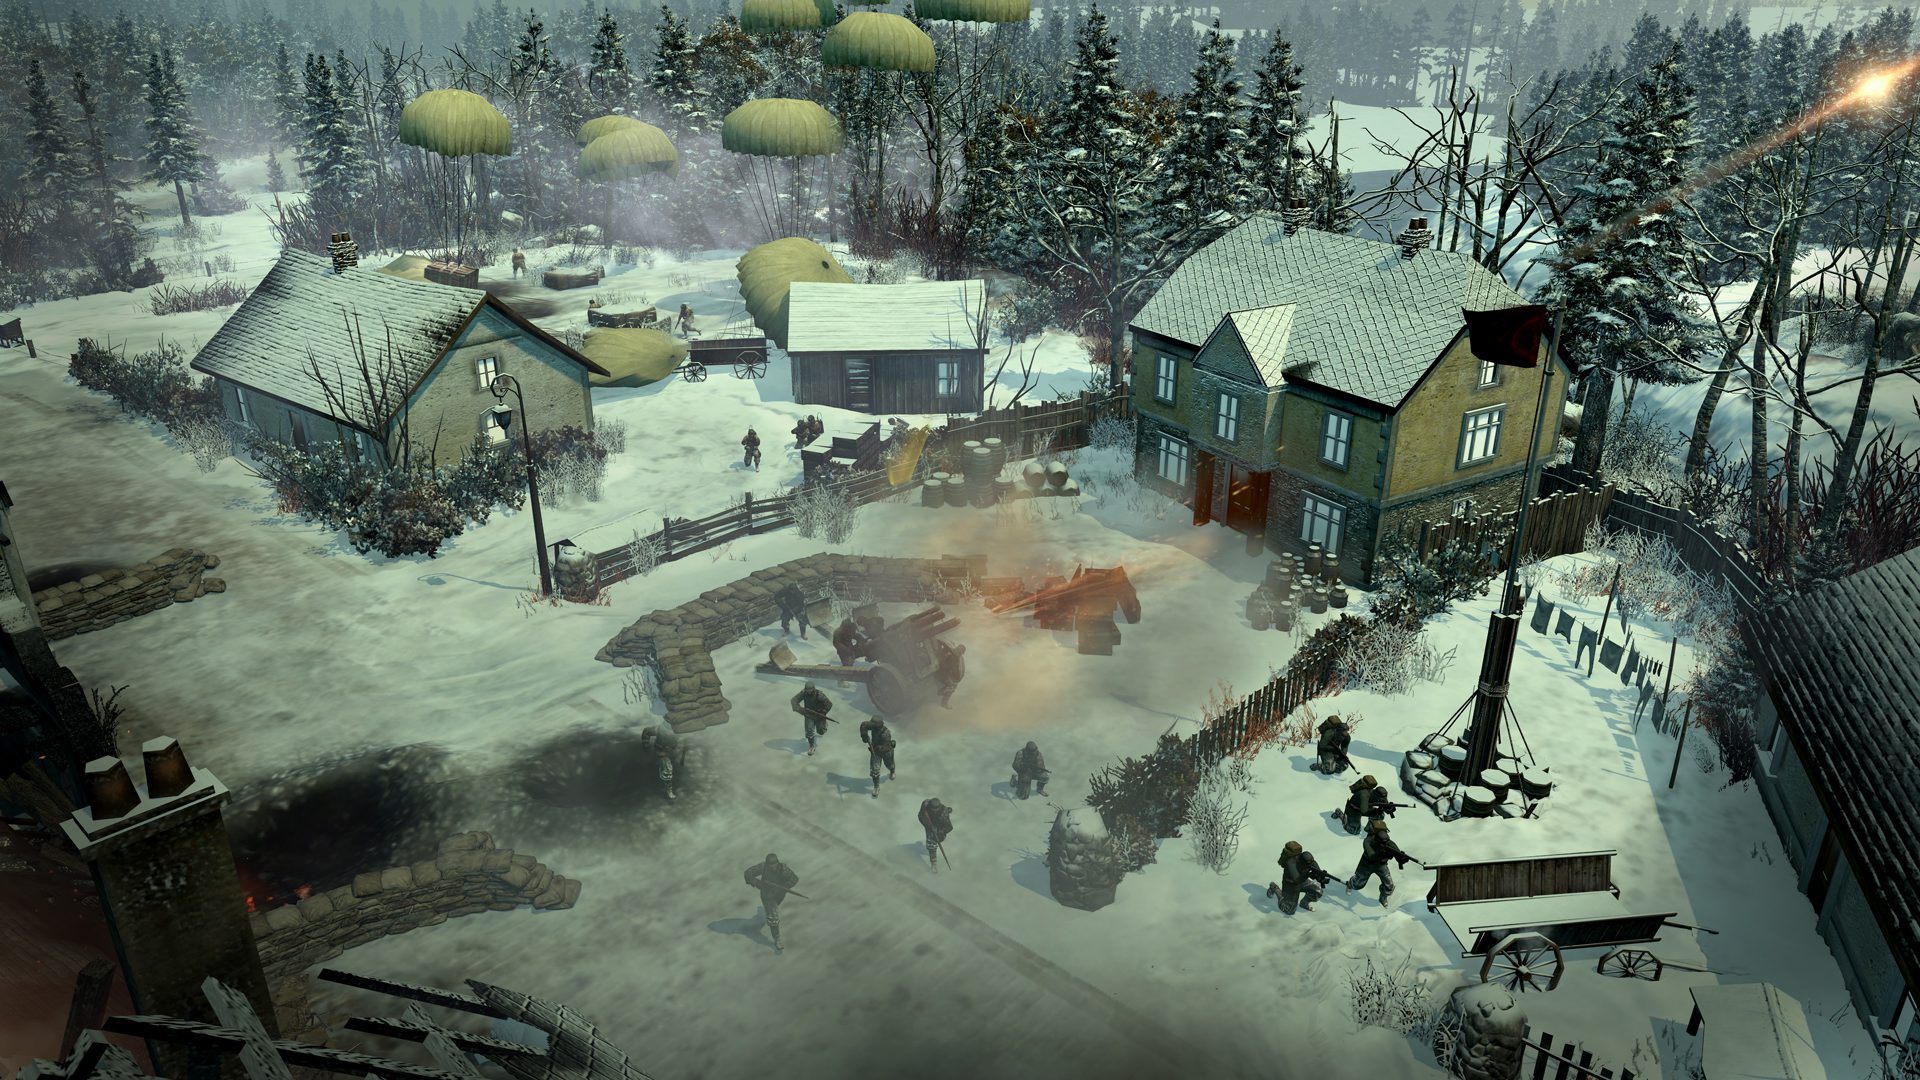 Company of heroes dlc. Company of Heroes 2: Ardennes Assault. Company of Heroes 2: Master collection. Coh2: Ardennes Assault. Company of Heroes 2 Ardennes Assault системные требования.